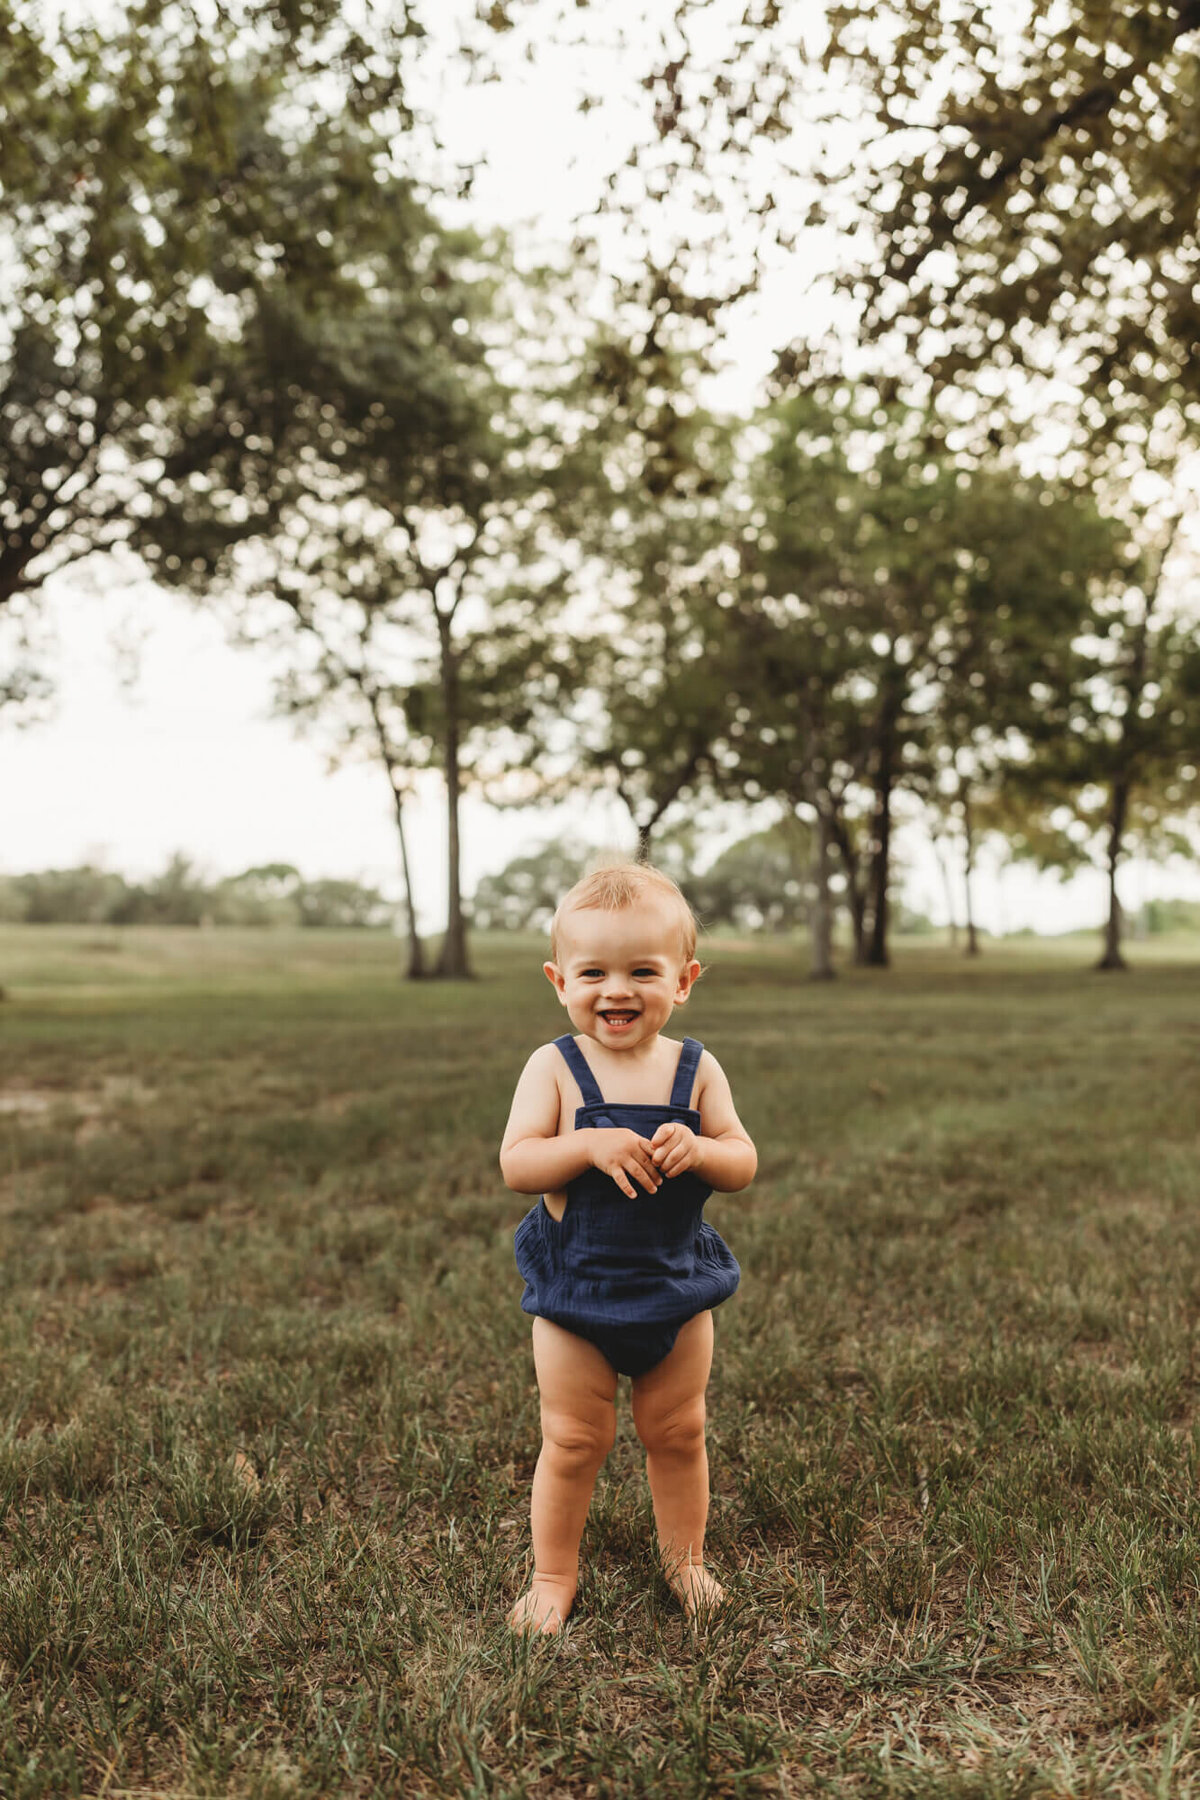 12 month old boy stands in blue romper on grass.